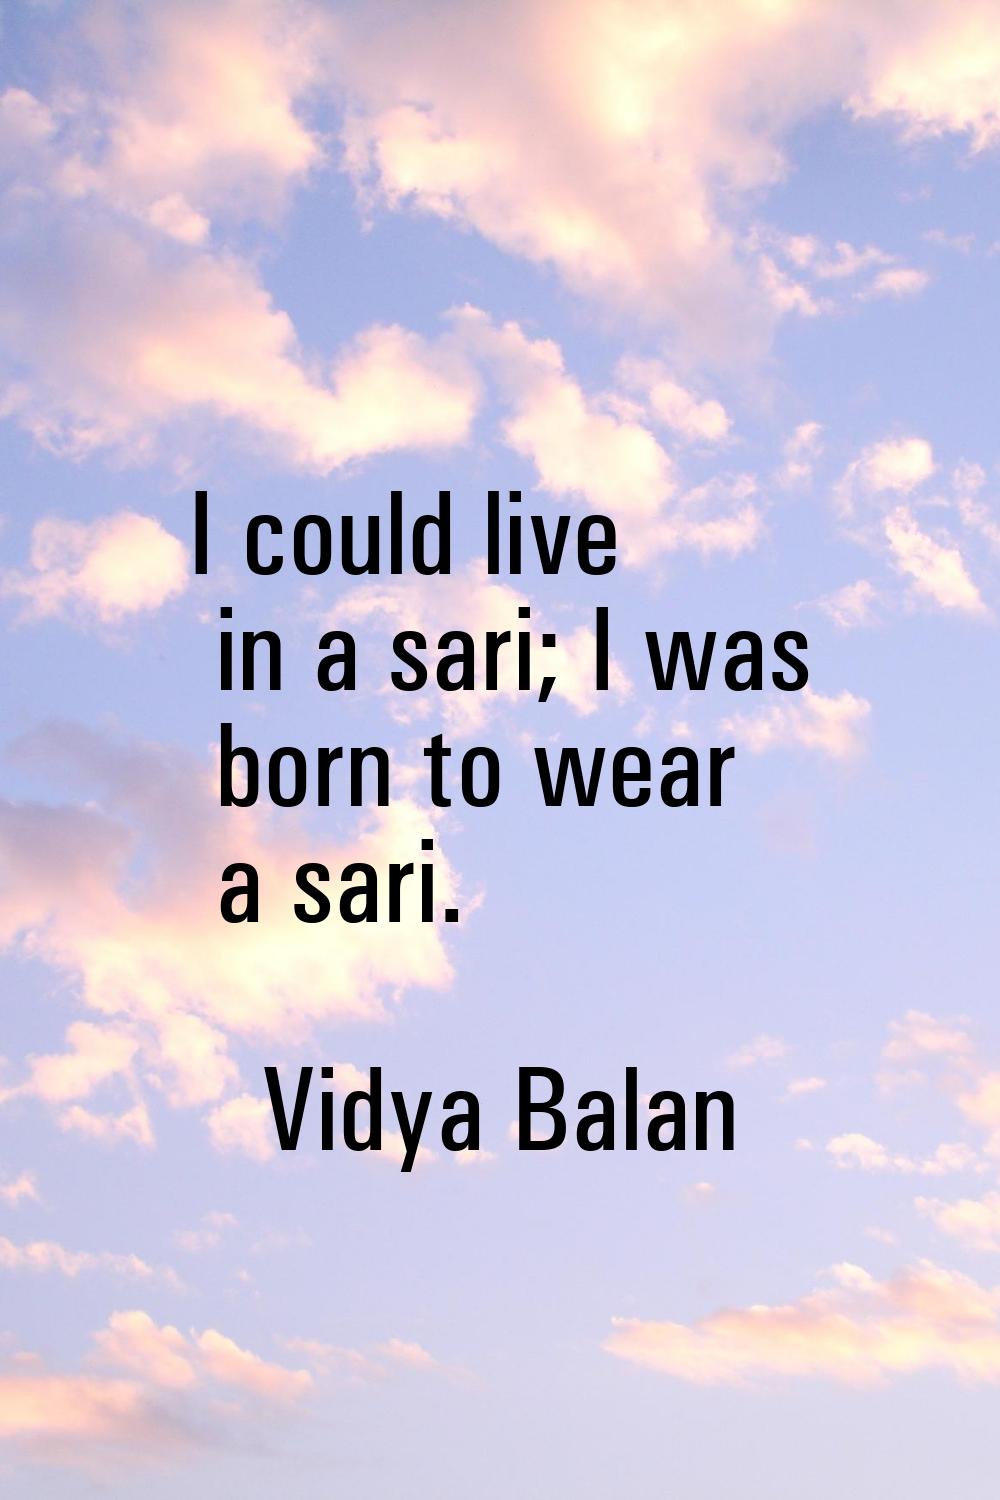 I could live in a sari; I was born to wear a sari.